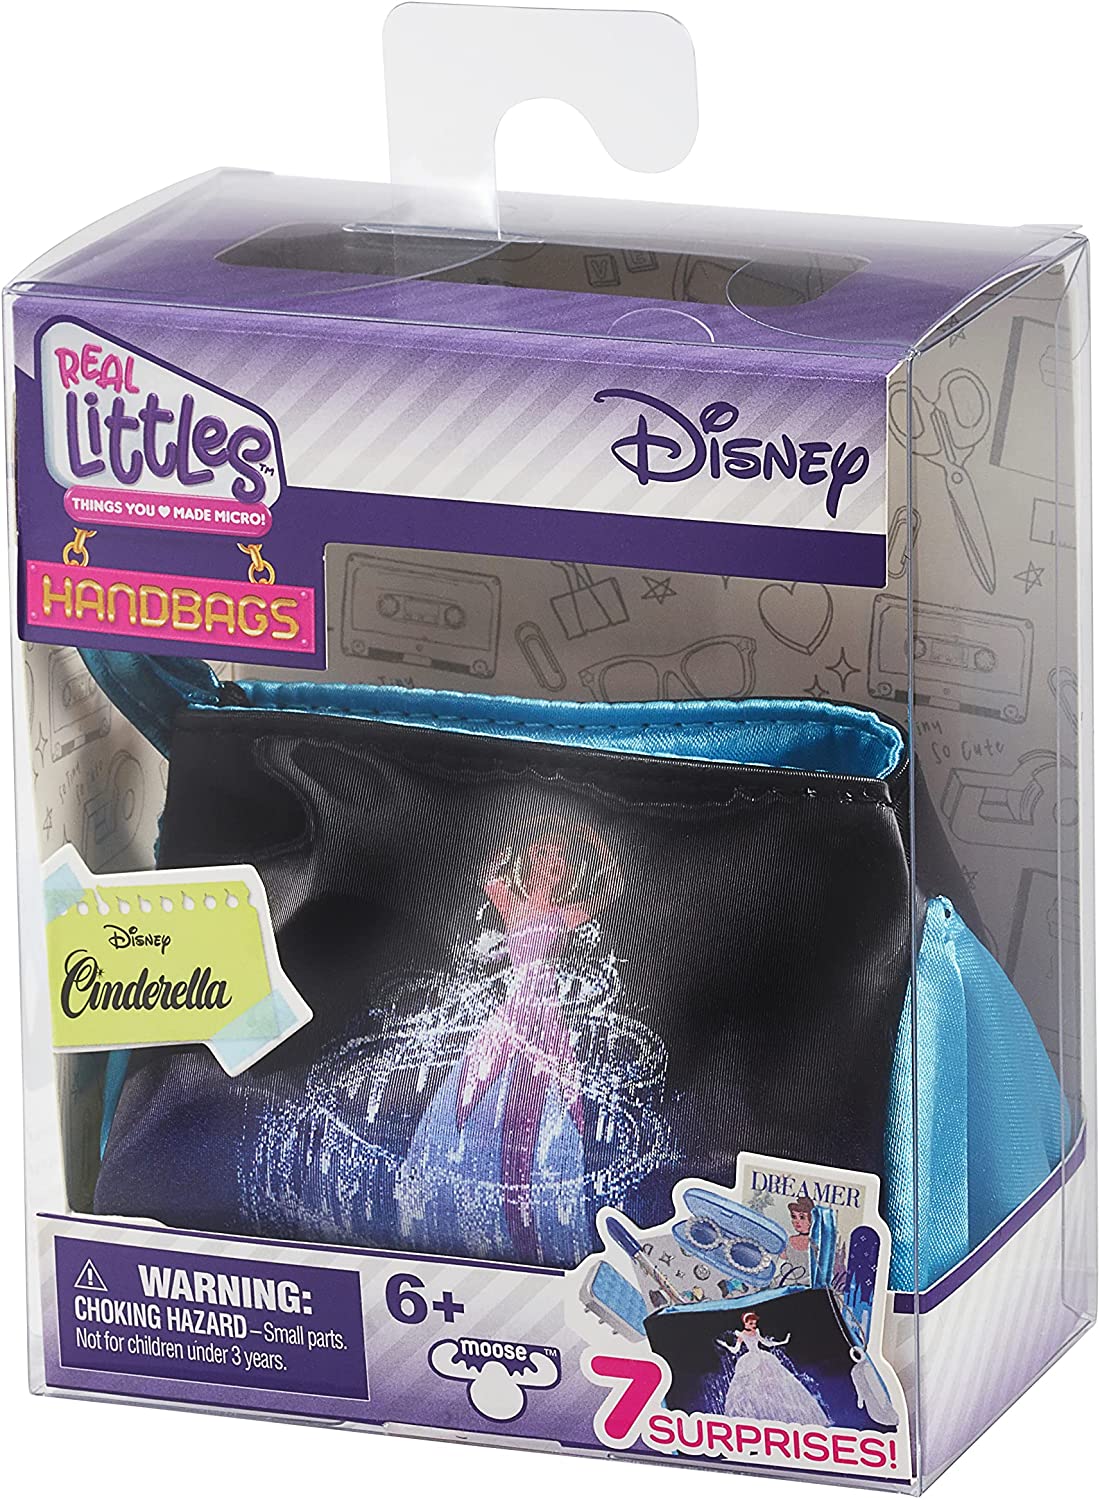 Real Littles Micro Crafts & Disney Bags GIVEAWAY!